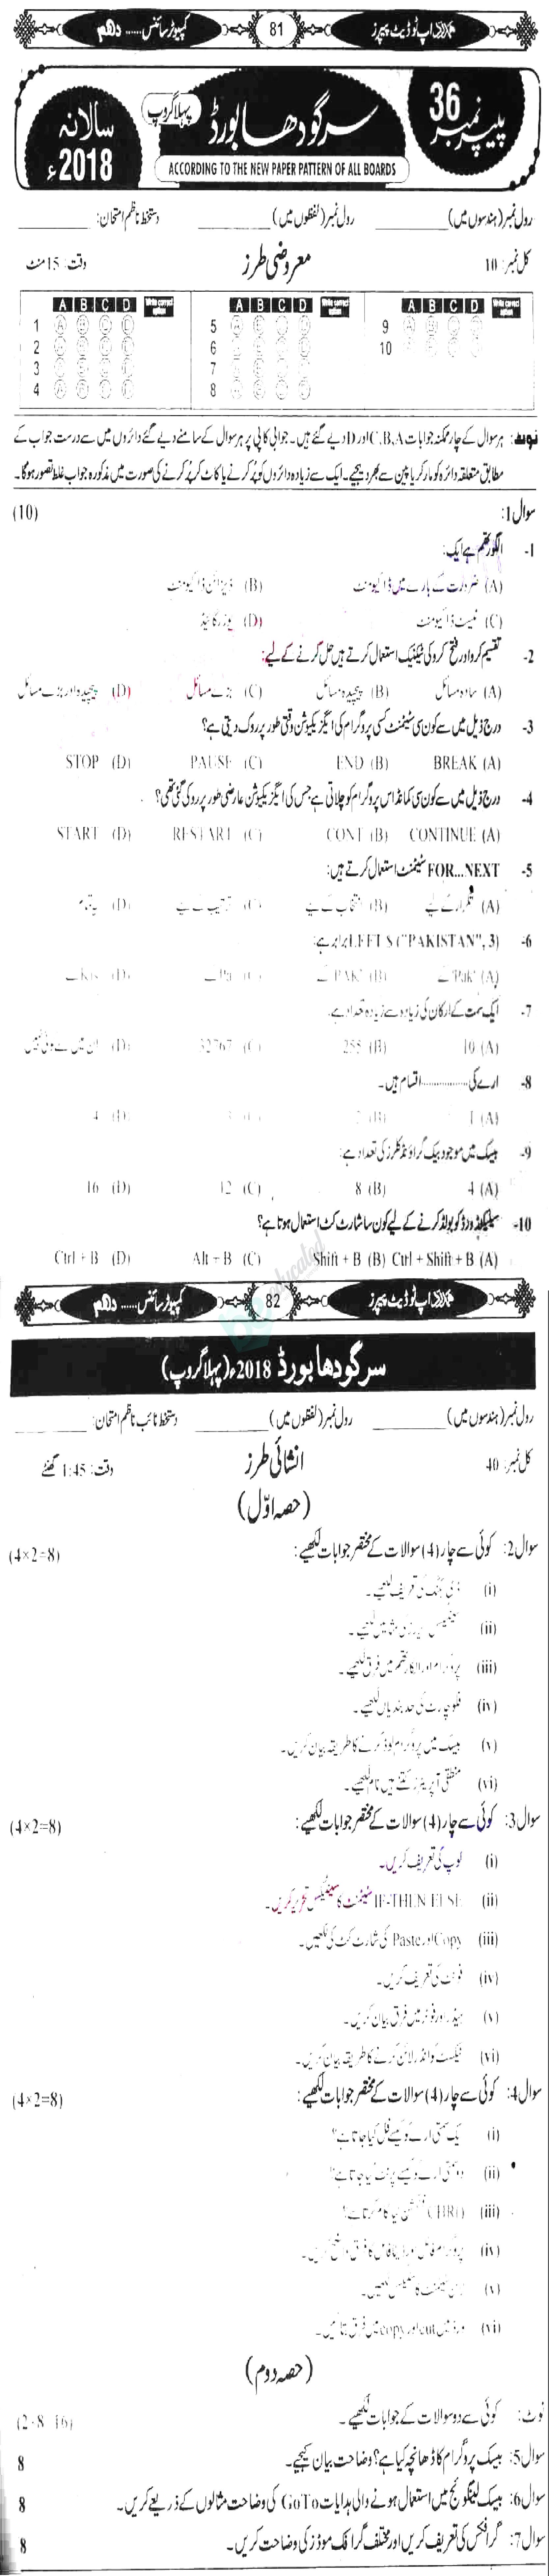 Computer Science 10th class Past Paper Group 1 BISE Sargodha 2018